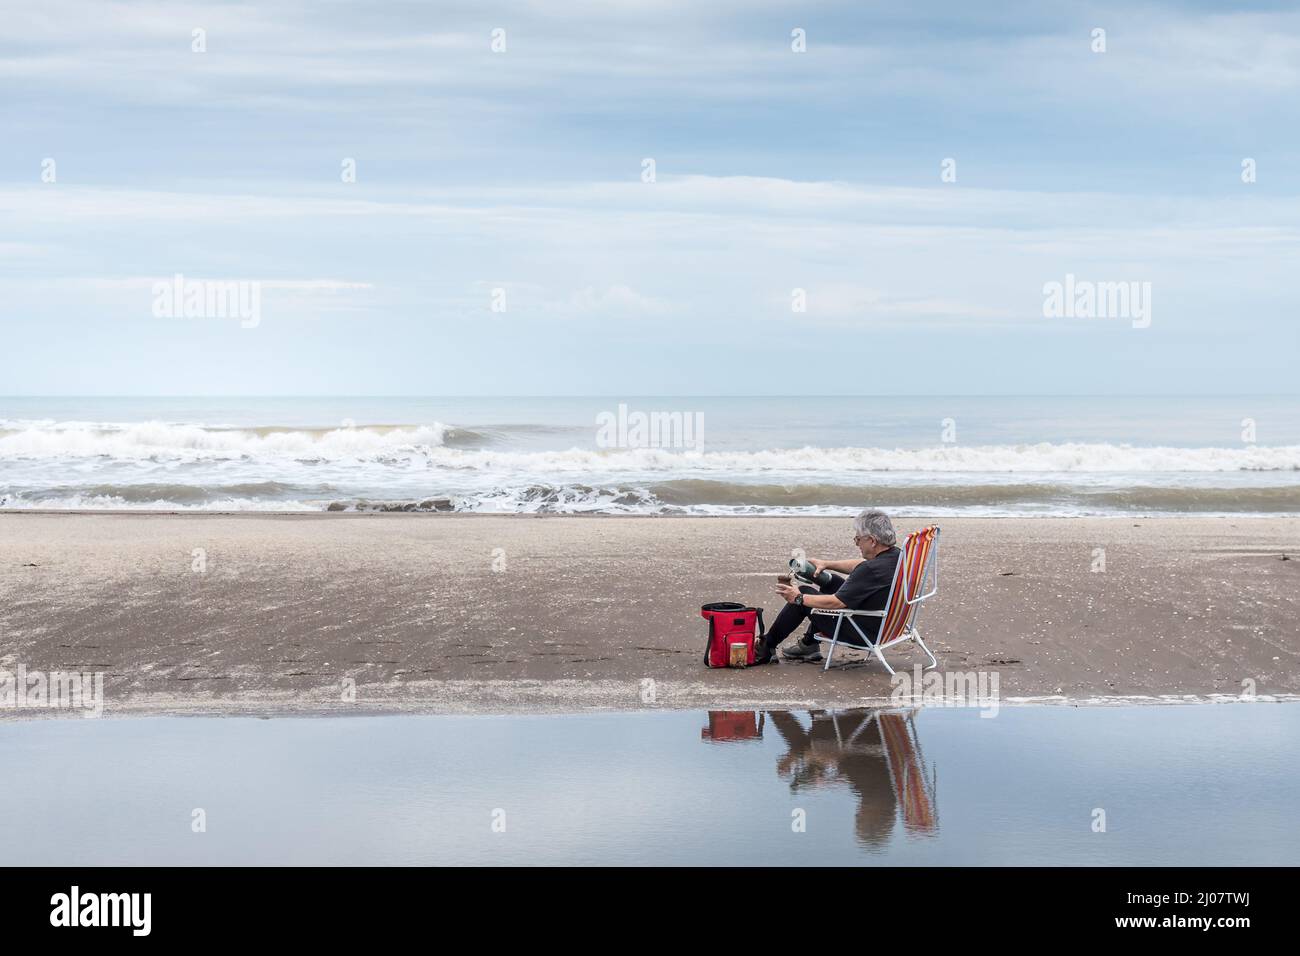 Mature adult male sitting on a beach chair pouring water in a mate all reflected in the water and in the background the waves of the sea. Stock Photo